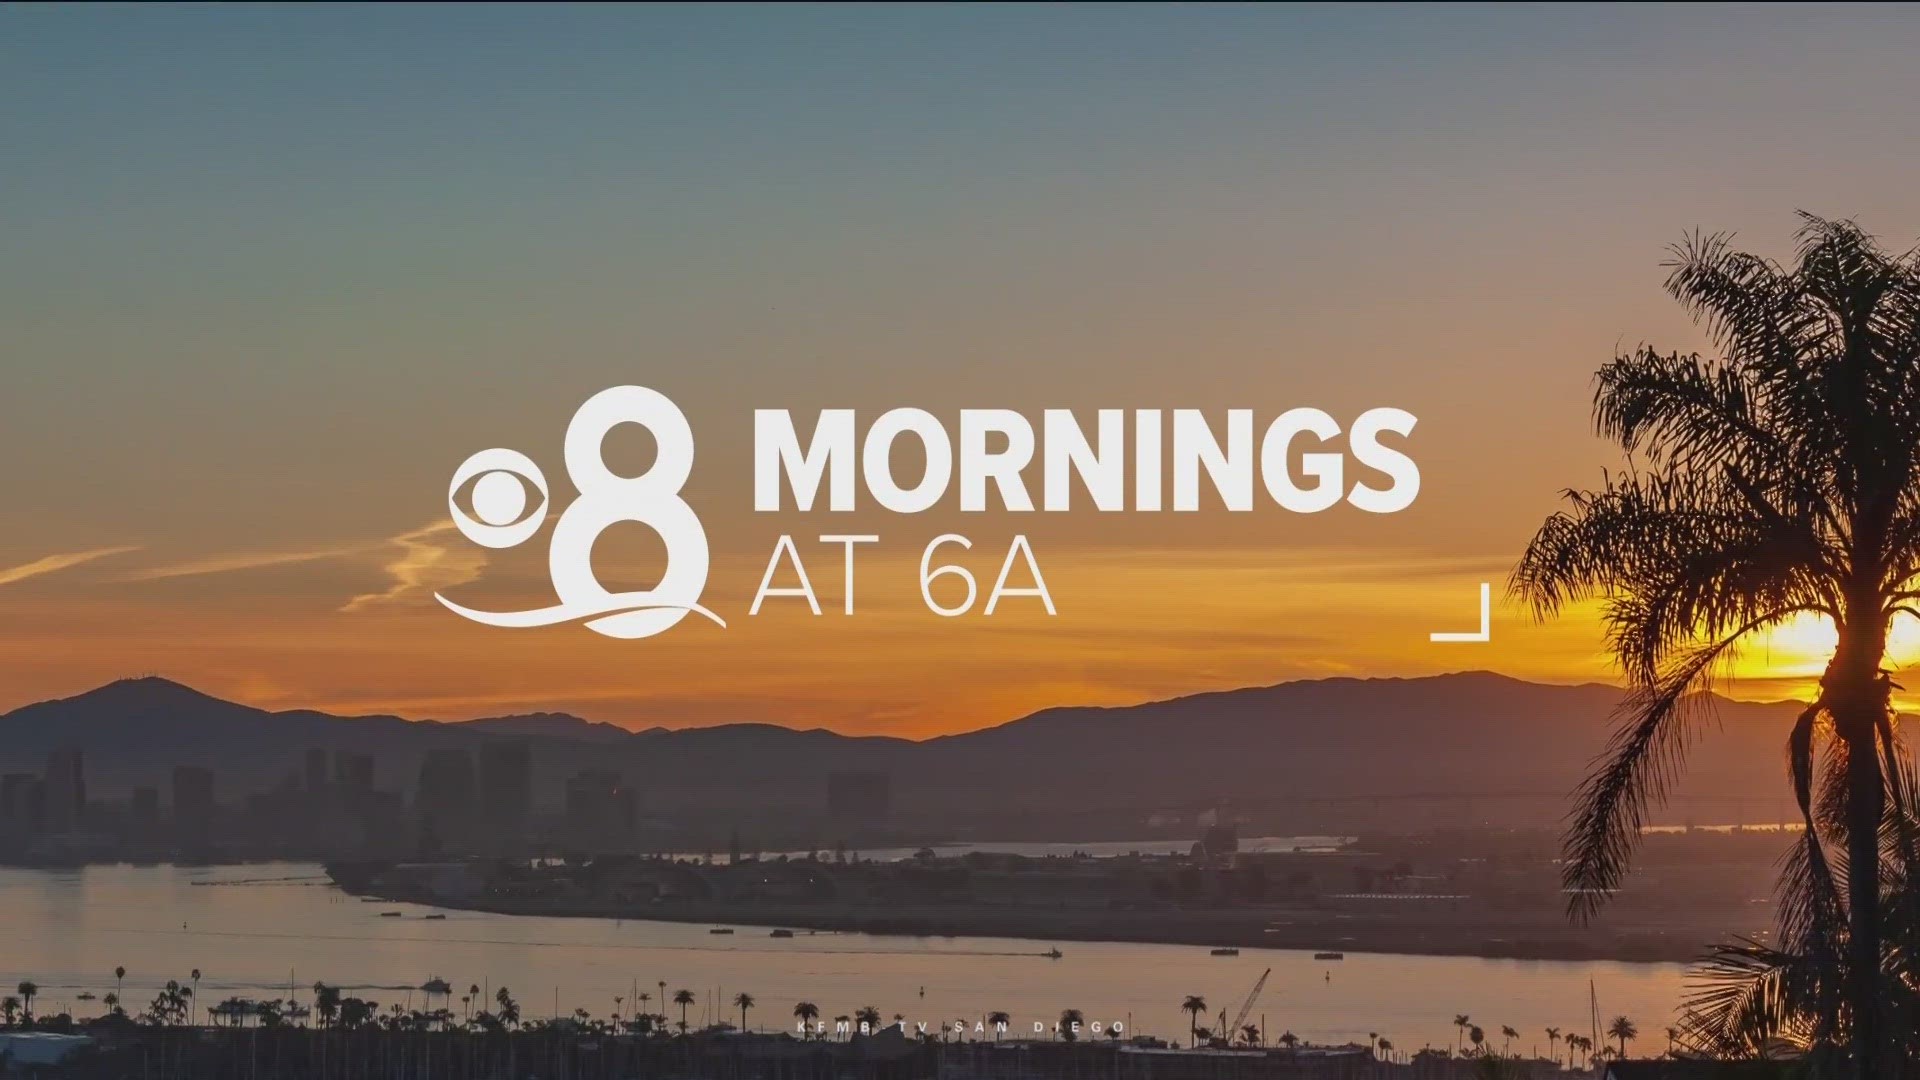 Today's top stories from CBS 8 in San Diego on December 14 at 6 a.m.